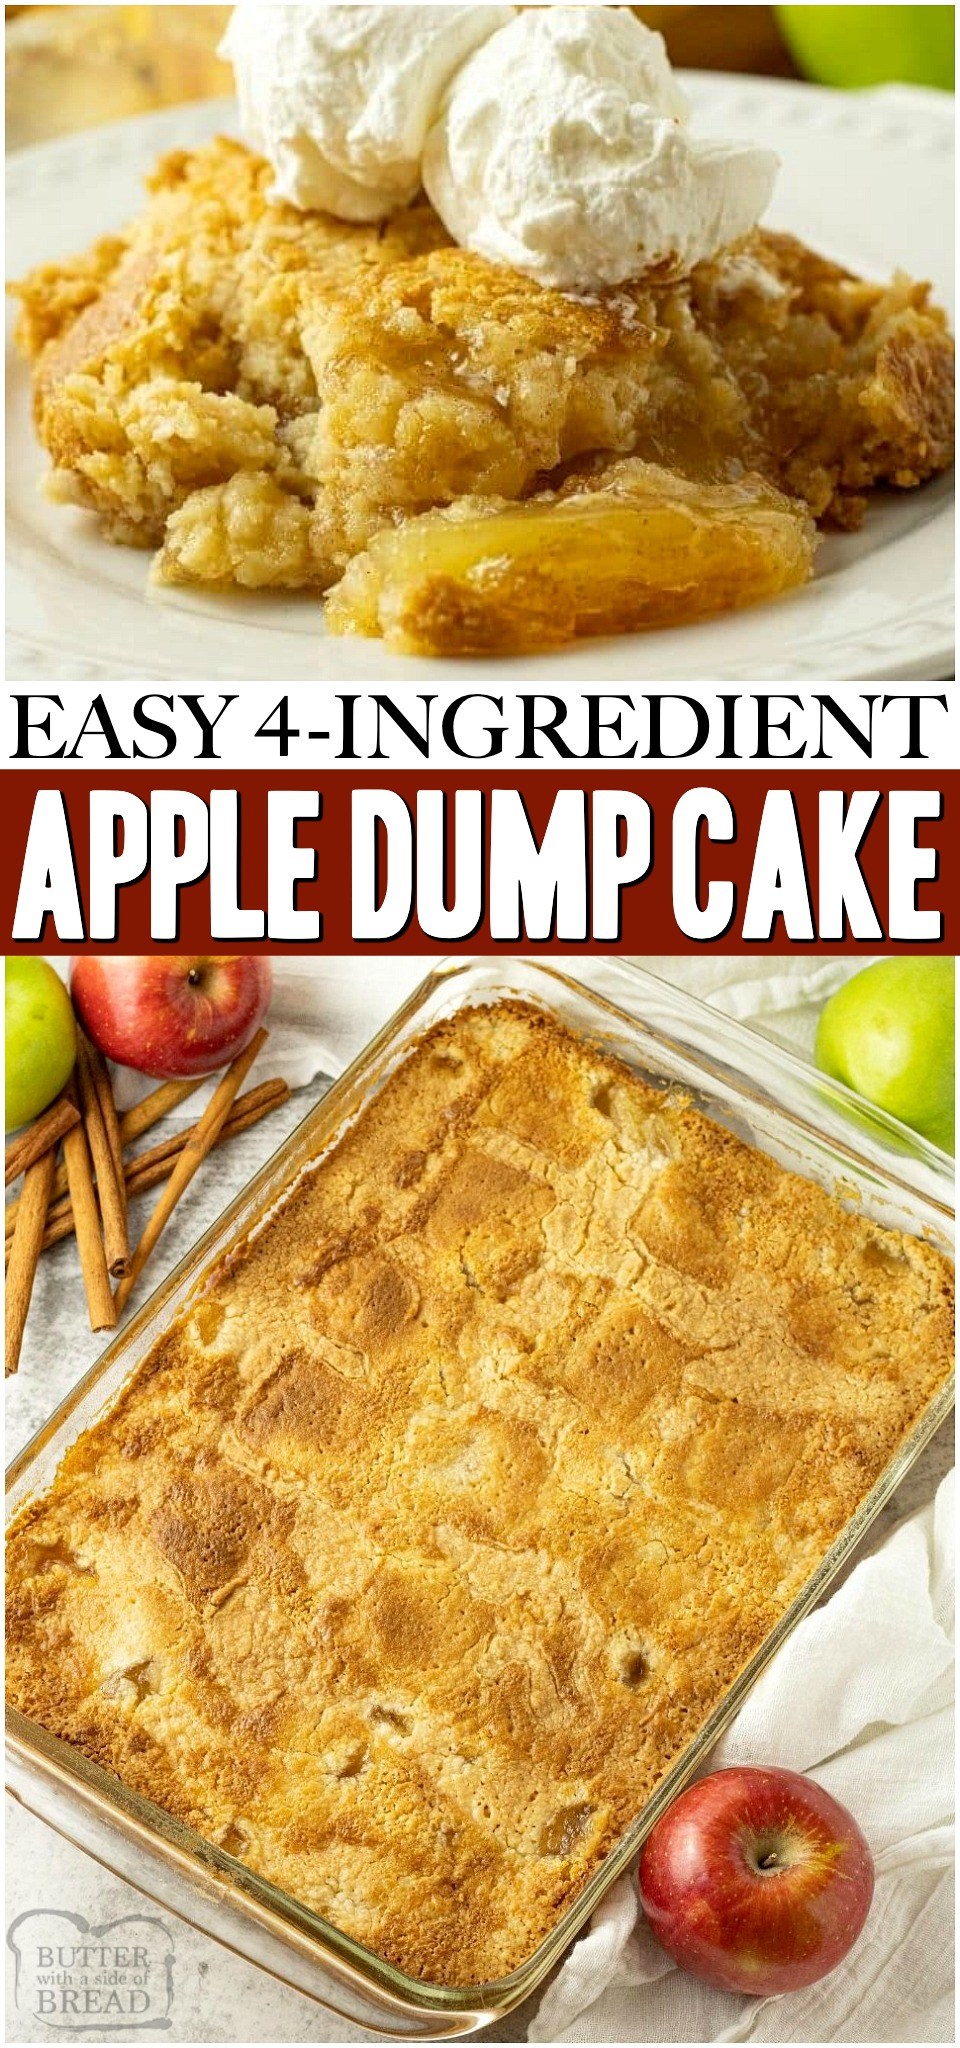 Easy Apple Dump Cake recipe with just 4 simple pantry ingredients! Cake mix & apple pie filling transform into a delicious apple dessert perfect for any occasion. #cake #apples #dumpcake #applecinnamon #butter #dessert #baking #recipe from BUTTER WITH A SIDE OF BREAD